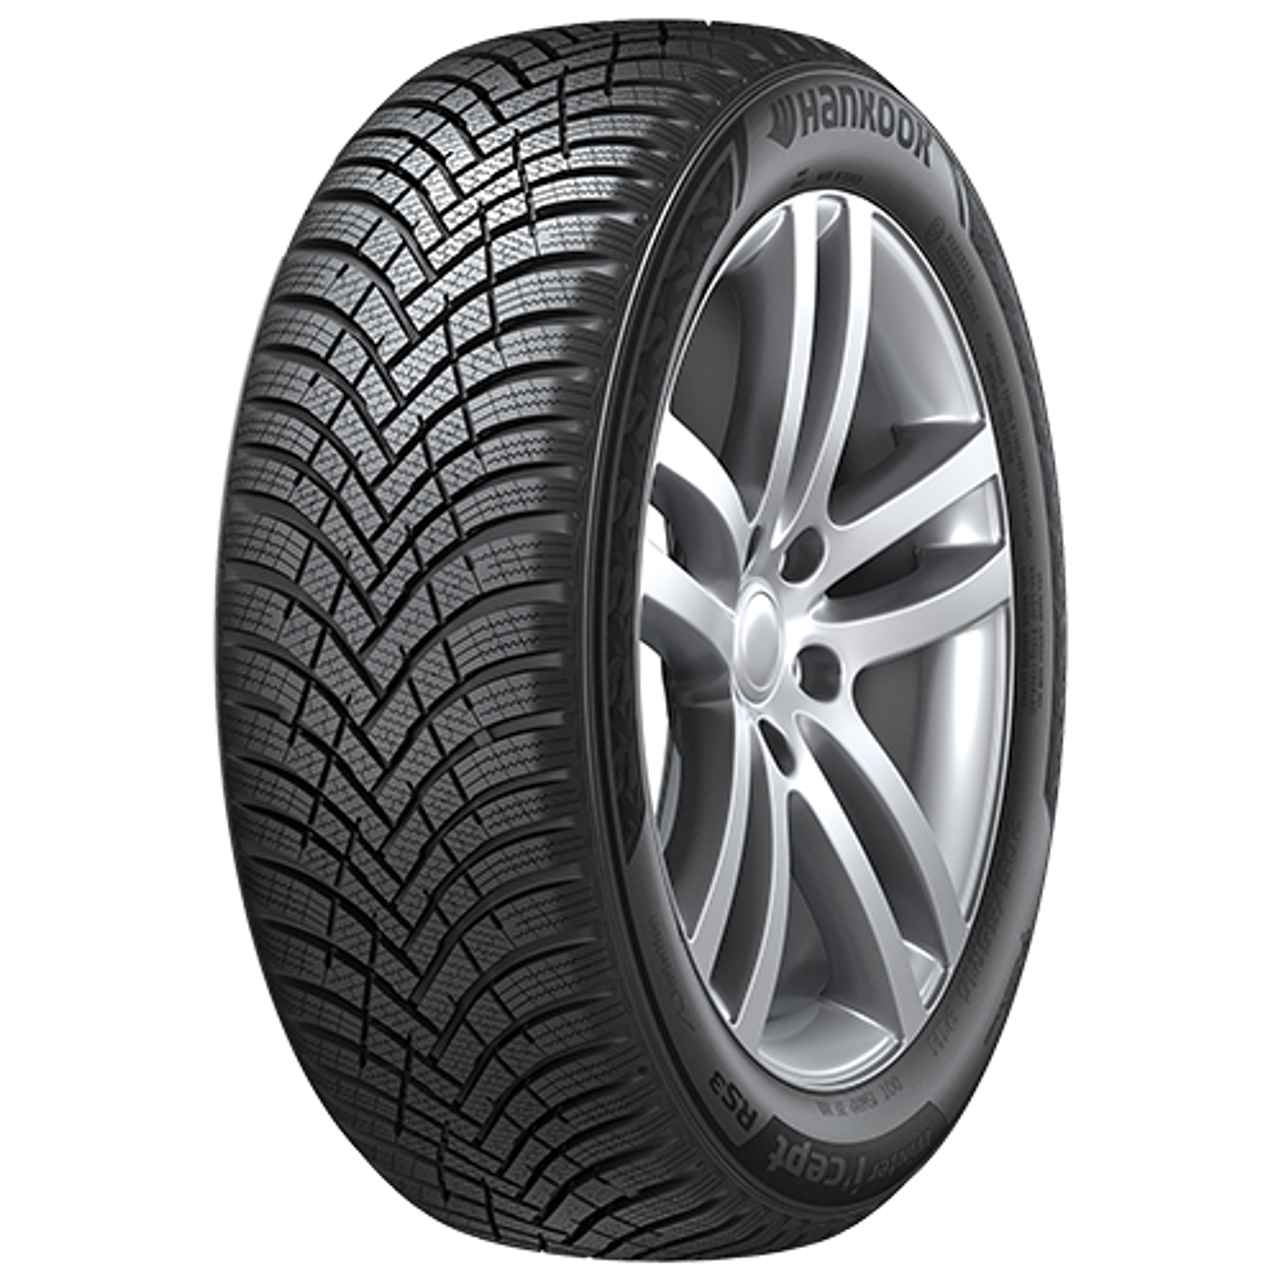 HANKOOK WINTER I*CEPT RS3 205/60R16 92H BSW